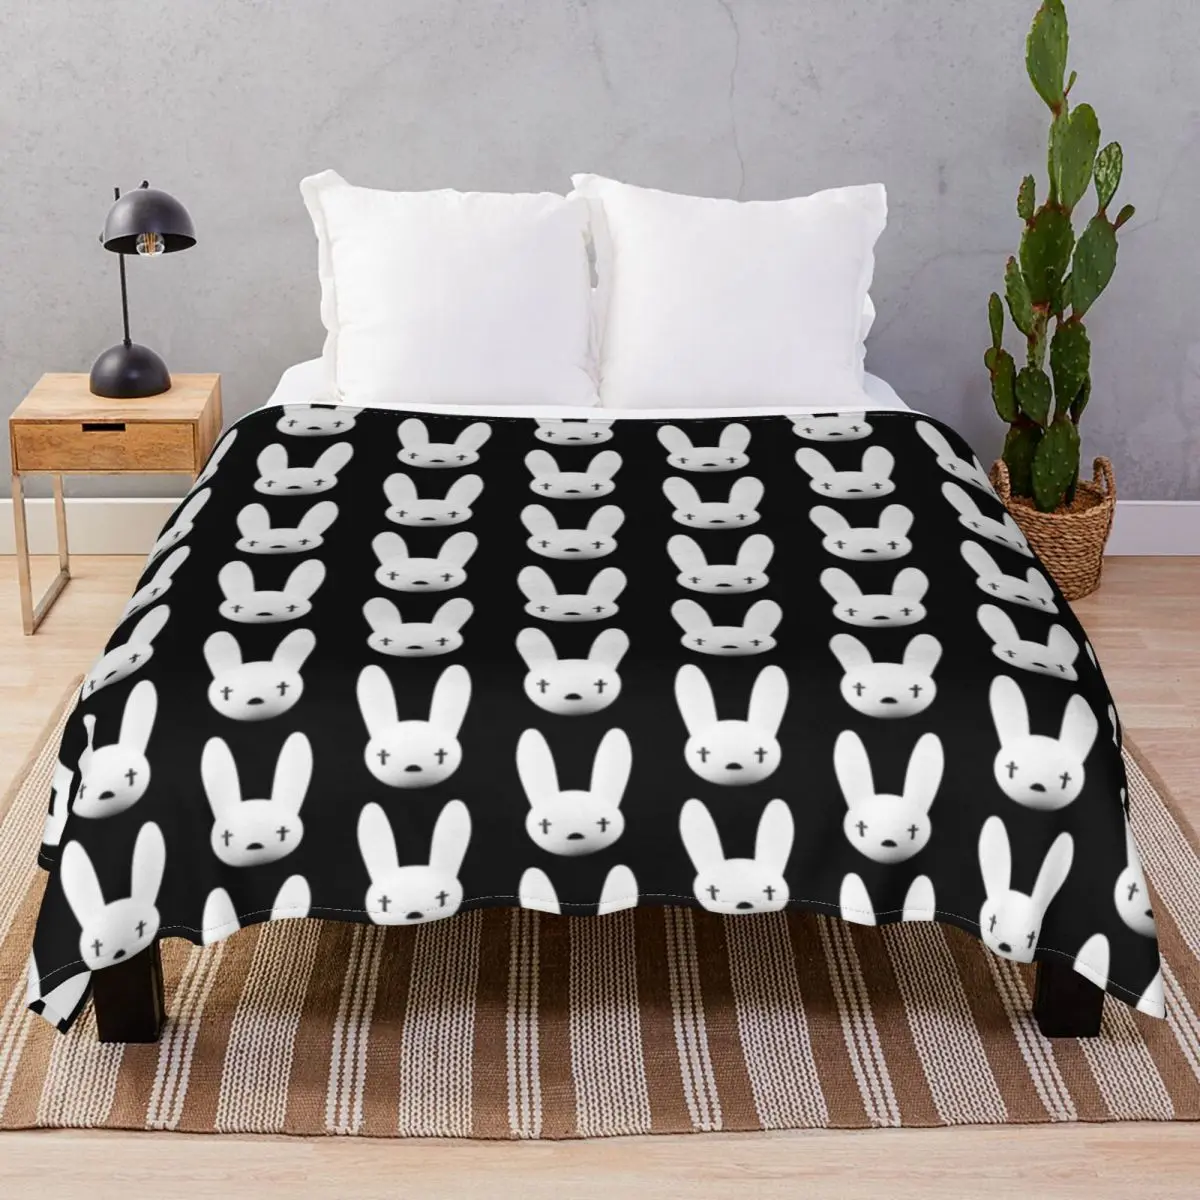 Bad Bunny Logo Blanket Flannel All Season Lightweight Thin Throw Blankets for Bed Home Couch Camp Cinema